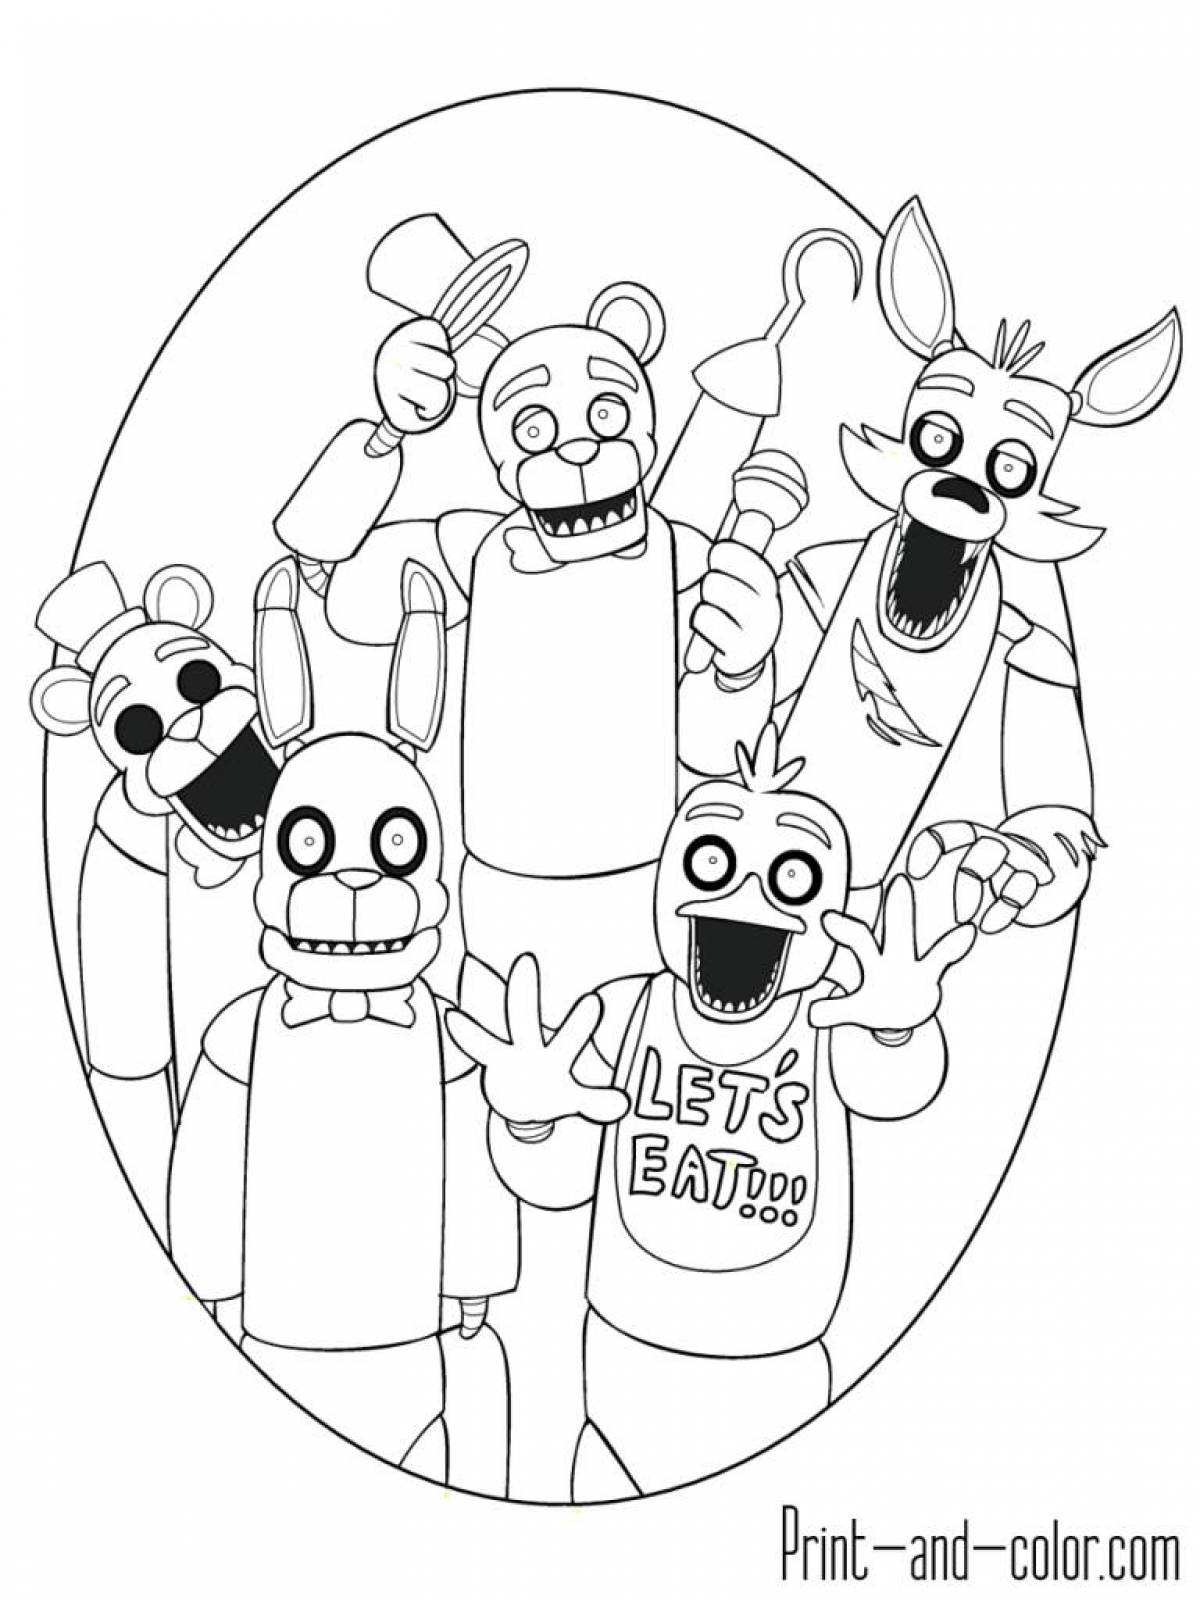 Freddy's excellent animatronic coloring book